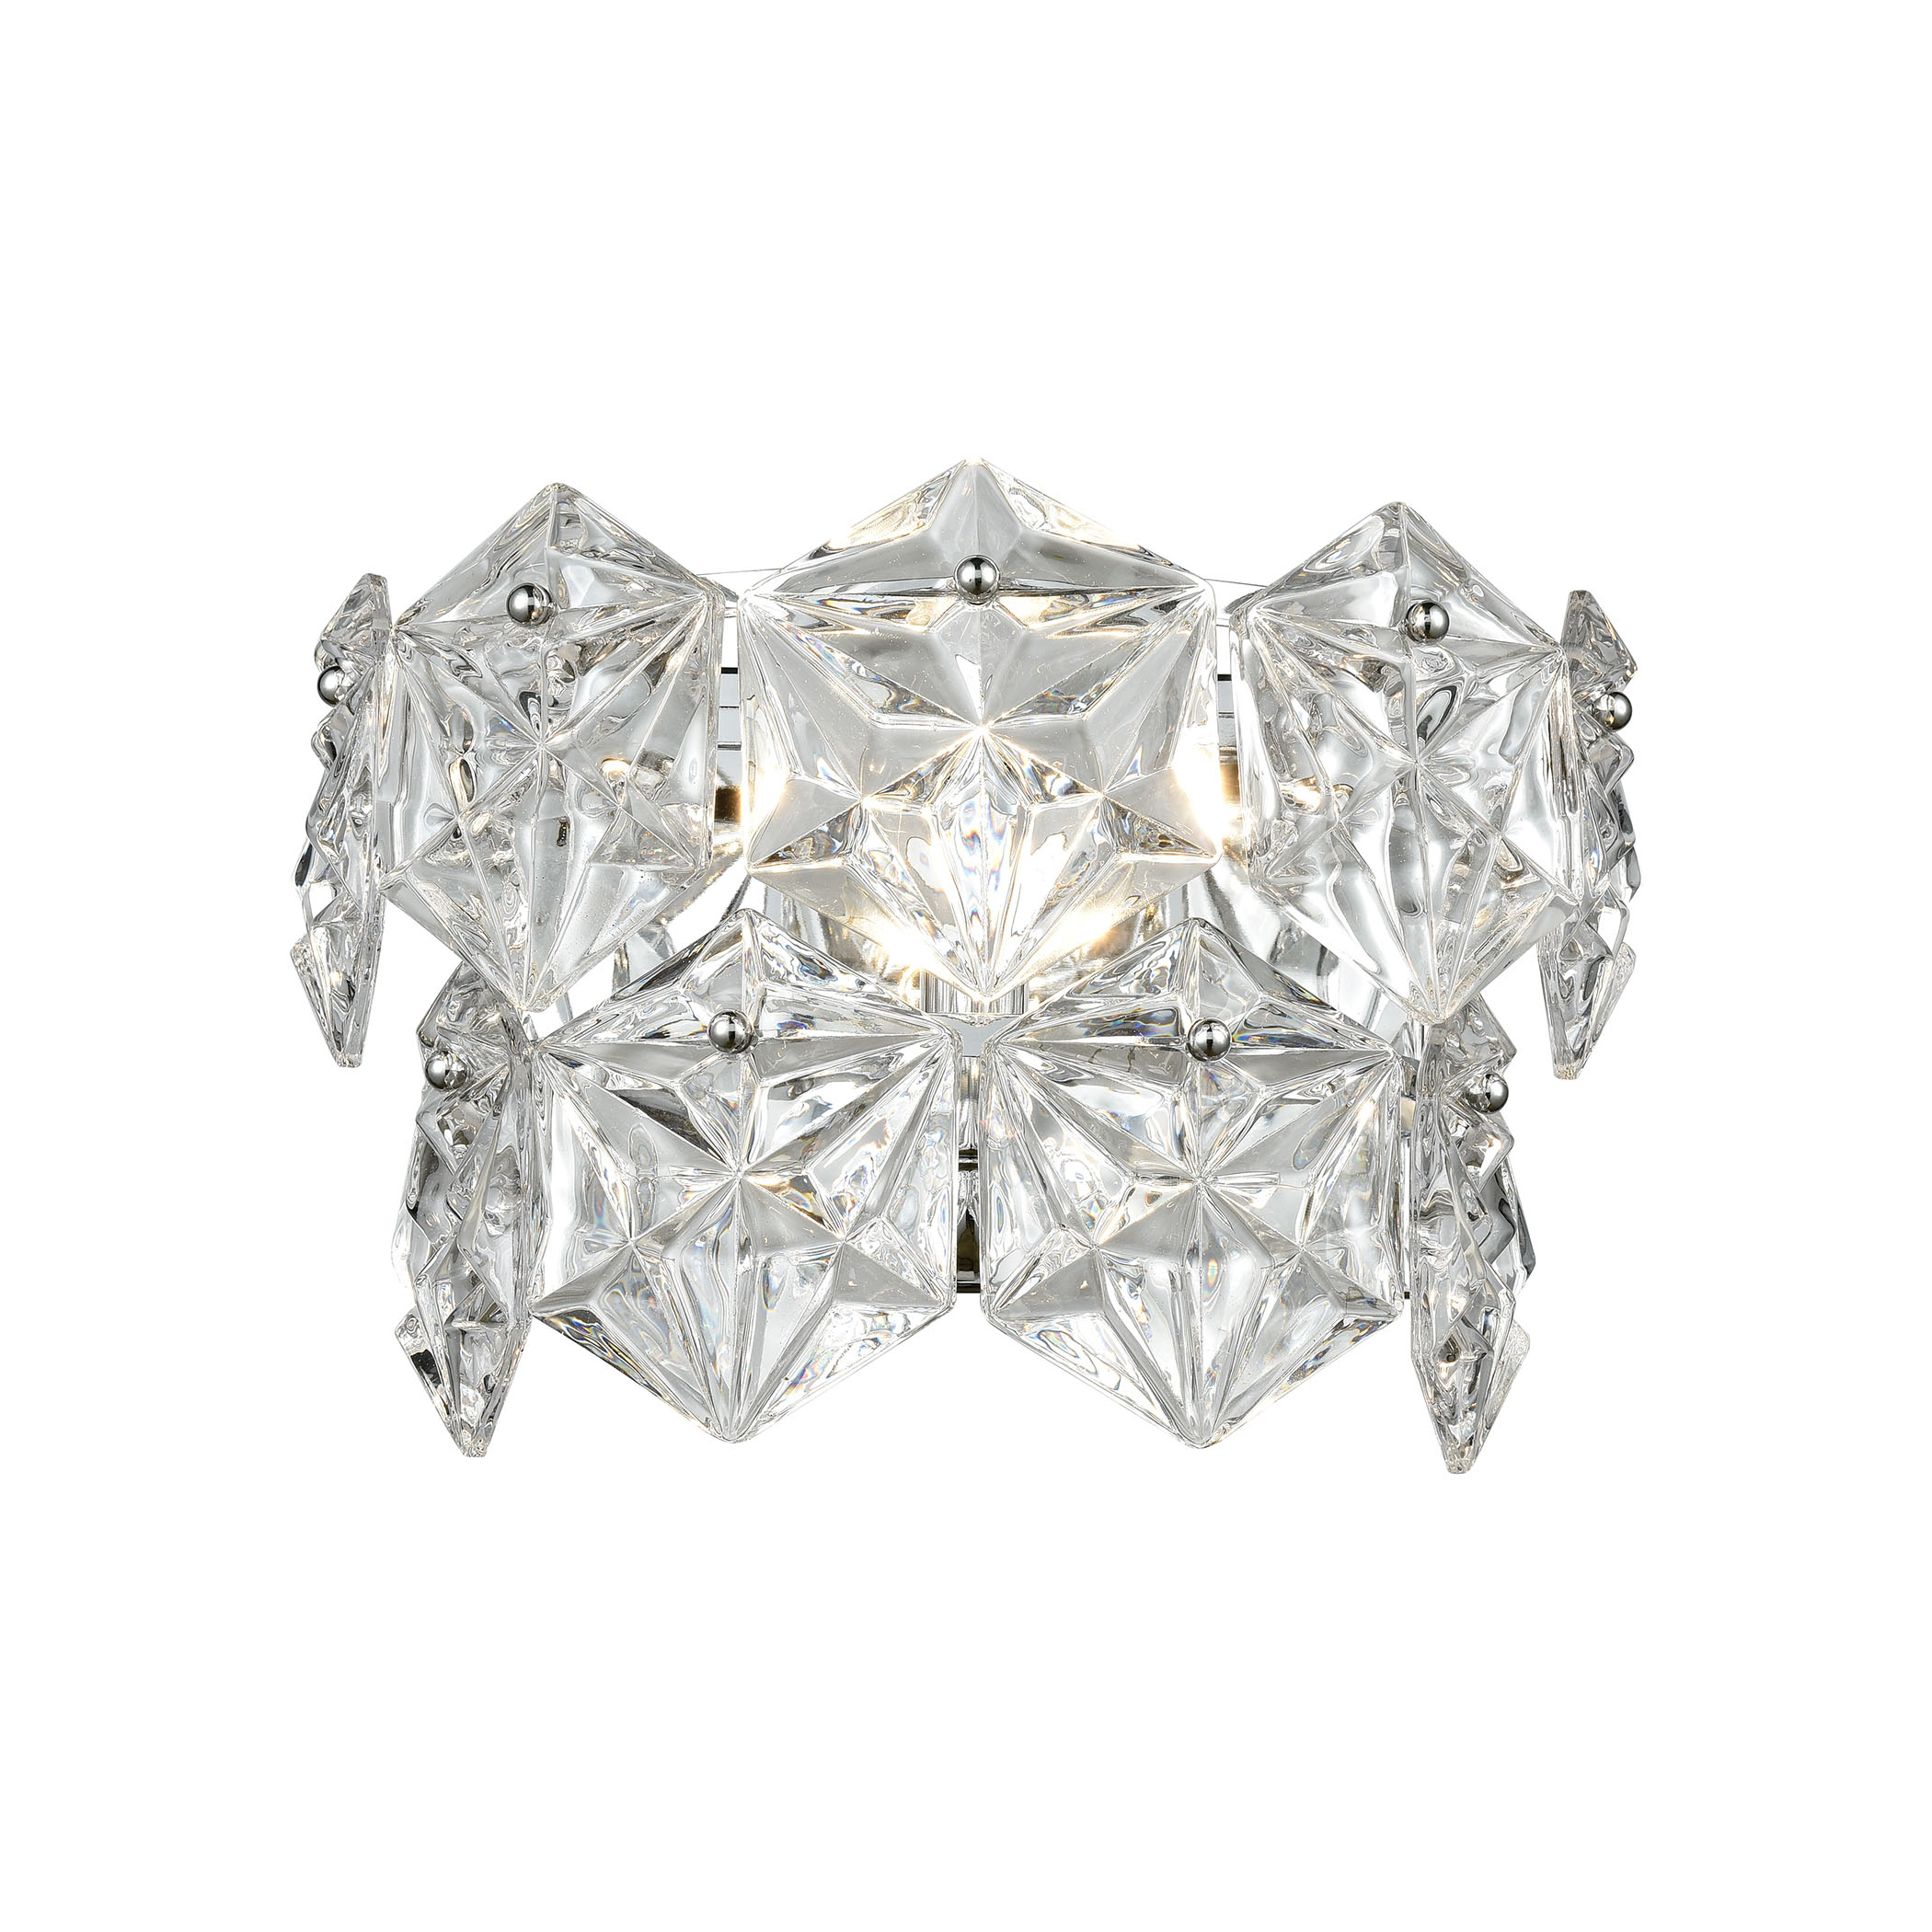 Lavique 1-Light Sconce in Polished Chrome with Clear Crystal_EL-81240/1